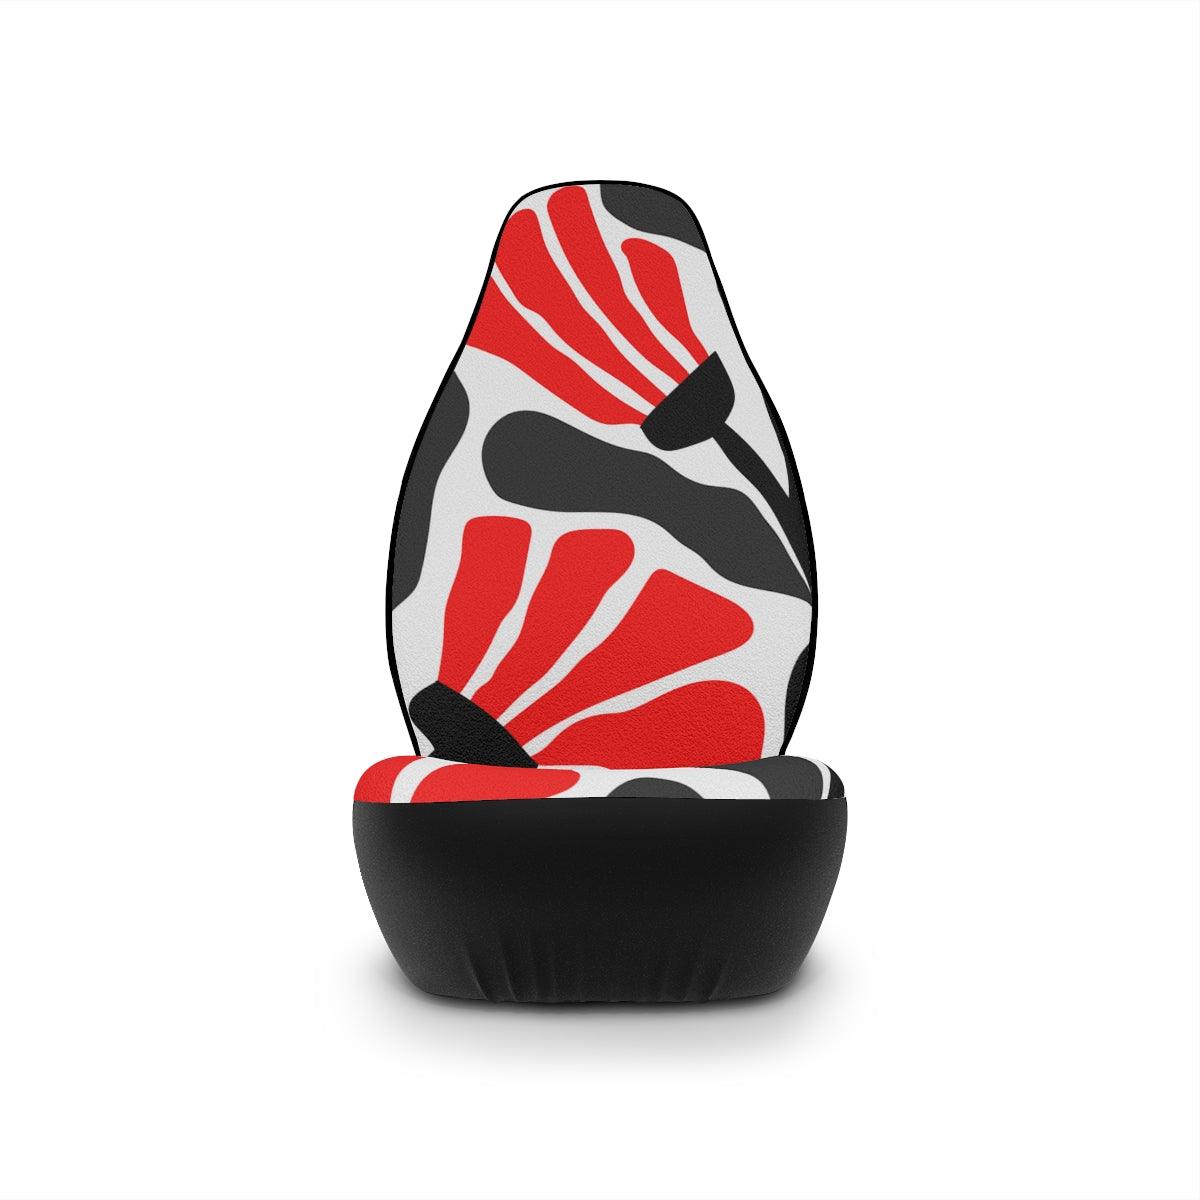 Retro Groovy Abstract Flowers Red, Black and White MCM Car Seat Covers | lovevisionkarma.com